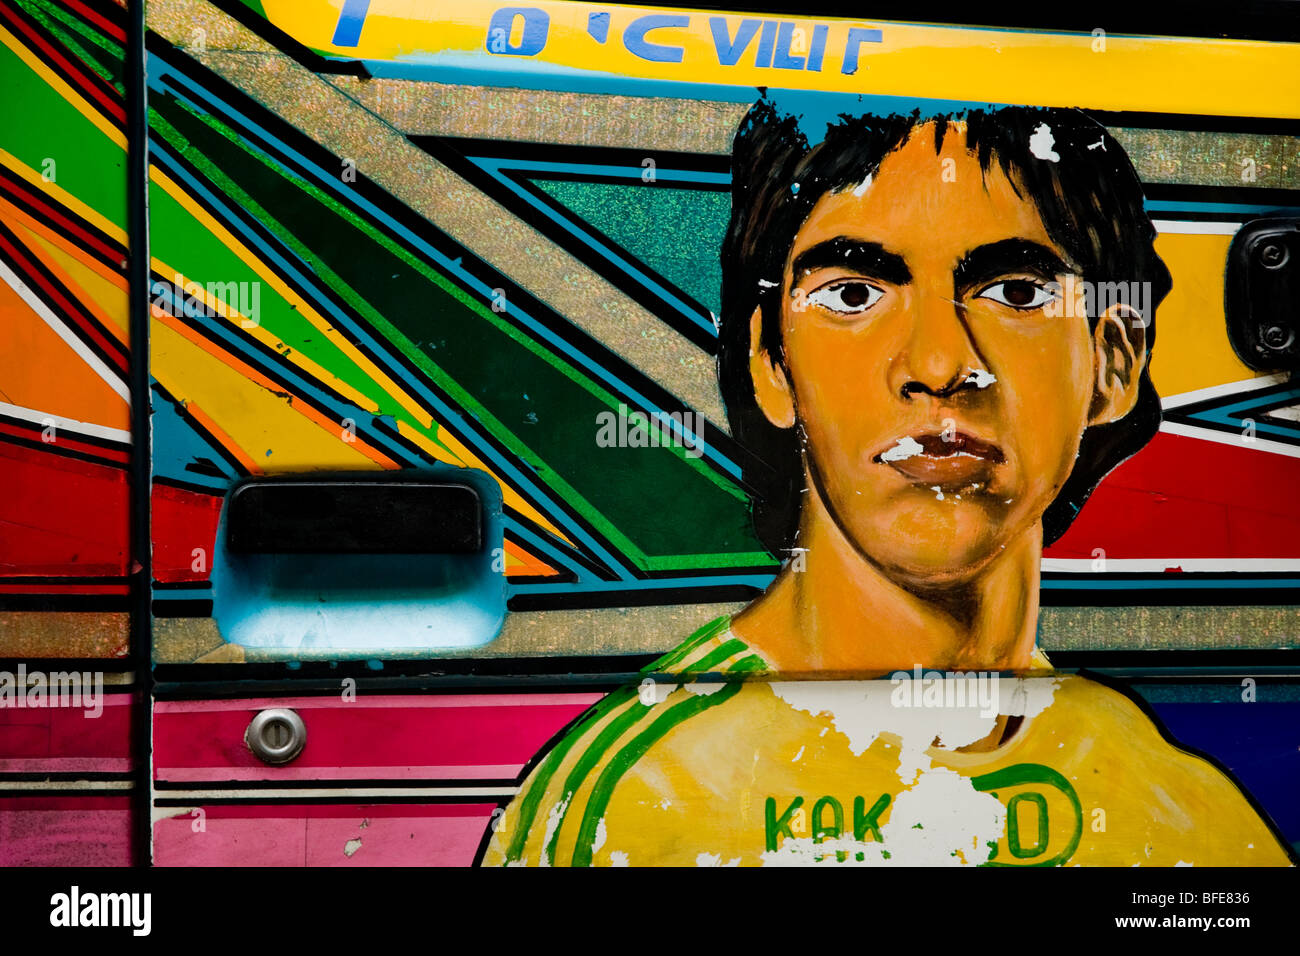 The Brazilian football player Kaka painted on the body of a tap-tap bus operating in Port-au-Prince, Haiti. Stock Photo